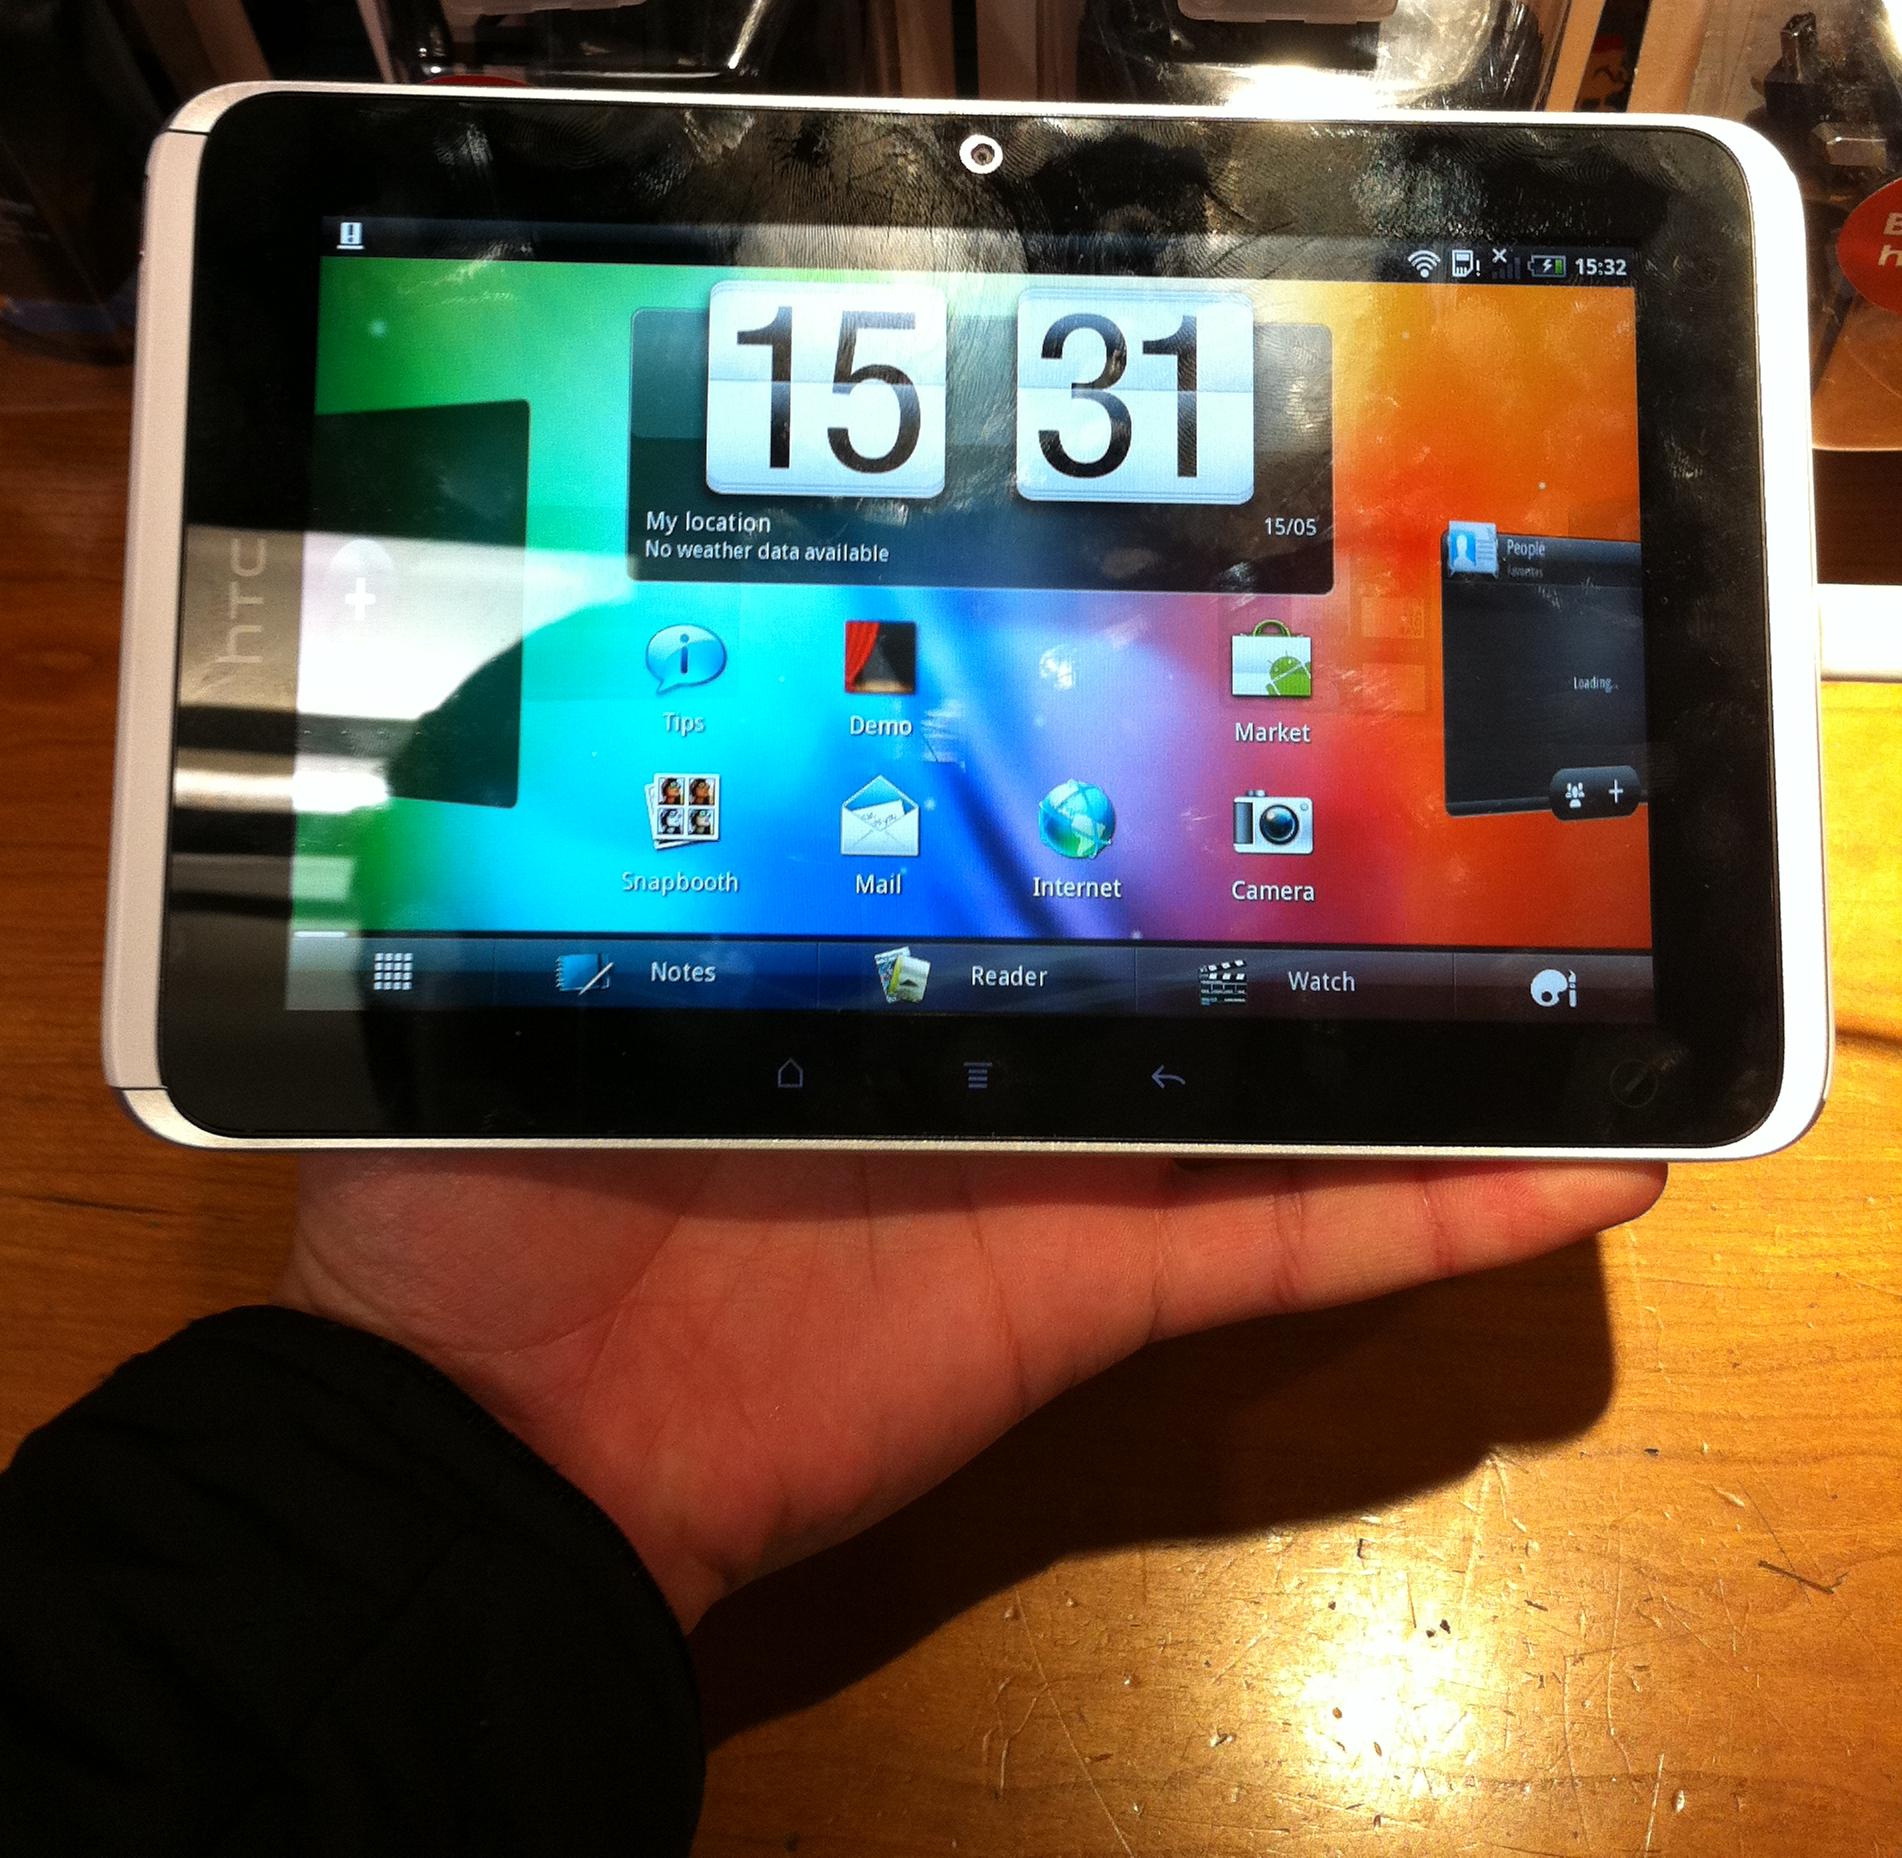 Hands On with the HTC Flyer